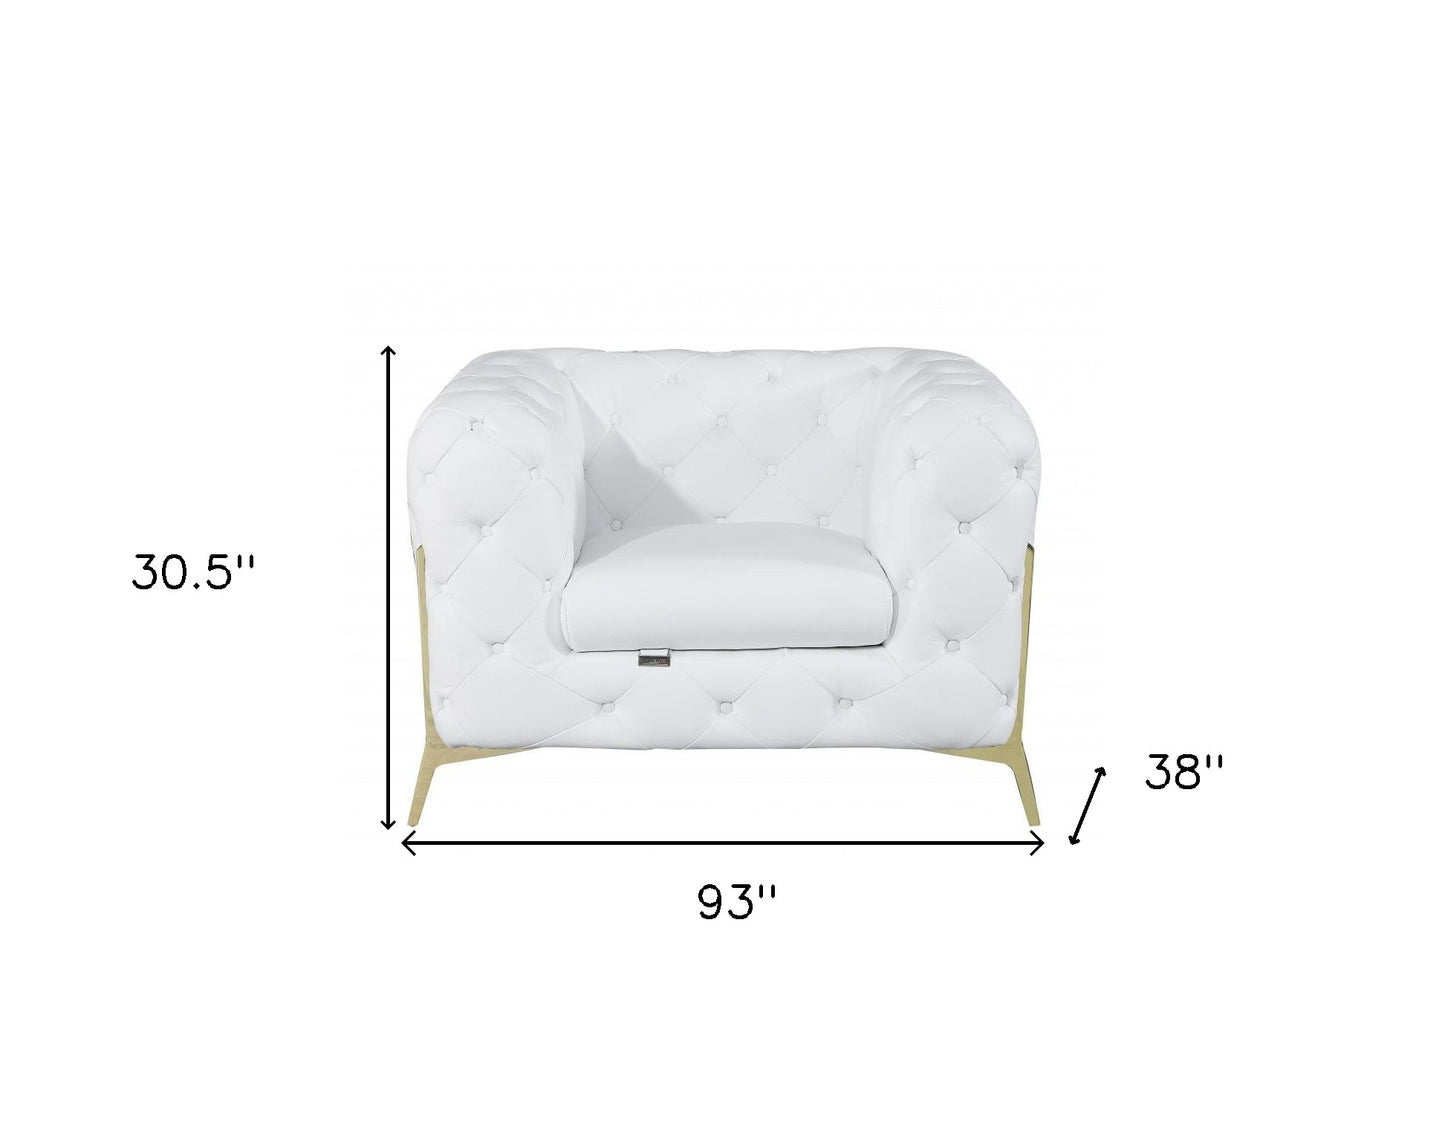 Three Piece White Italian Leather Five Person Seating Set By Homeroots